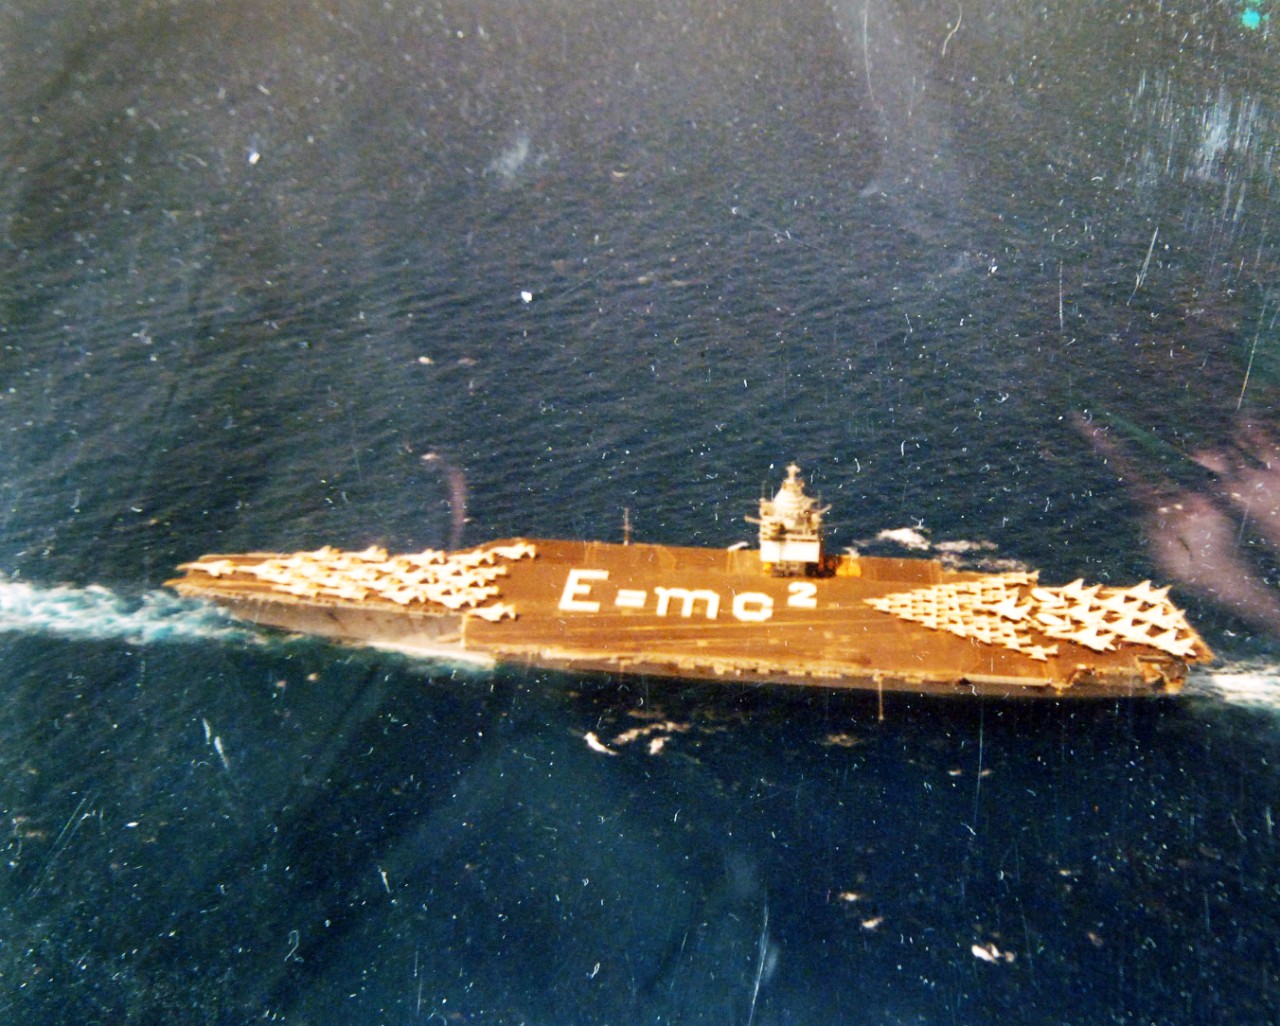 428-GX-KN-11207:  USS Enterprise (CVAN-65), 1964.   Operation Sea Orbit, the first surface around the world cruise, without replenishment, of Nuclear Task Force One, comprising of USS Enterprise, USS Long Beach (CGN-9), and USS Bainbridge (DLGN-25). Crewmembers onboard CVAN-65 form the equation for Einstein’s Theory of Relativity.    Photographed by Lieutenant R.R. Conger, July 21, 1964.    Official U.S. Navy Photograph, now in the collections of the National Archives.  (2017/11/29).  